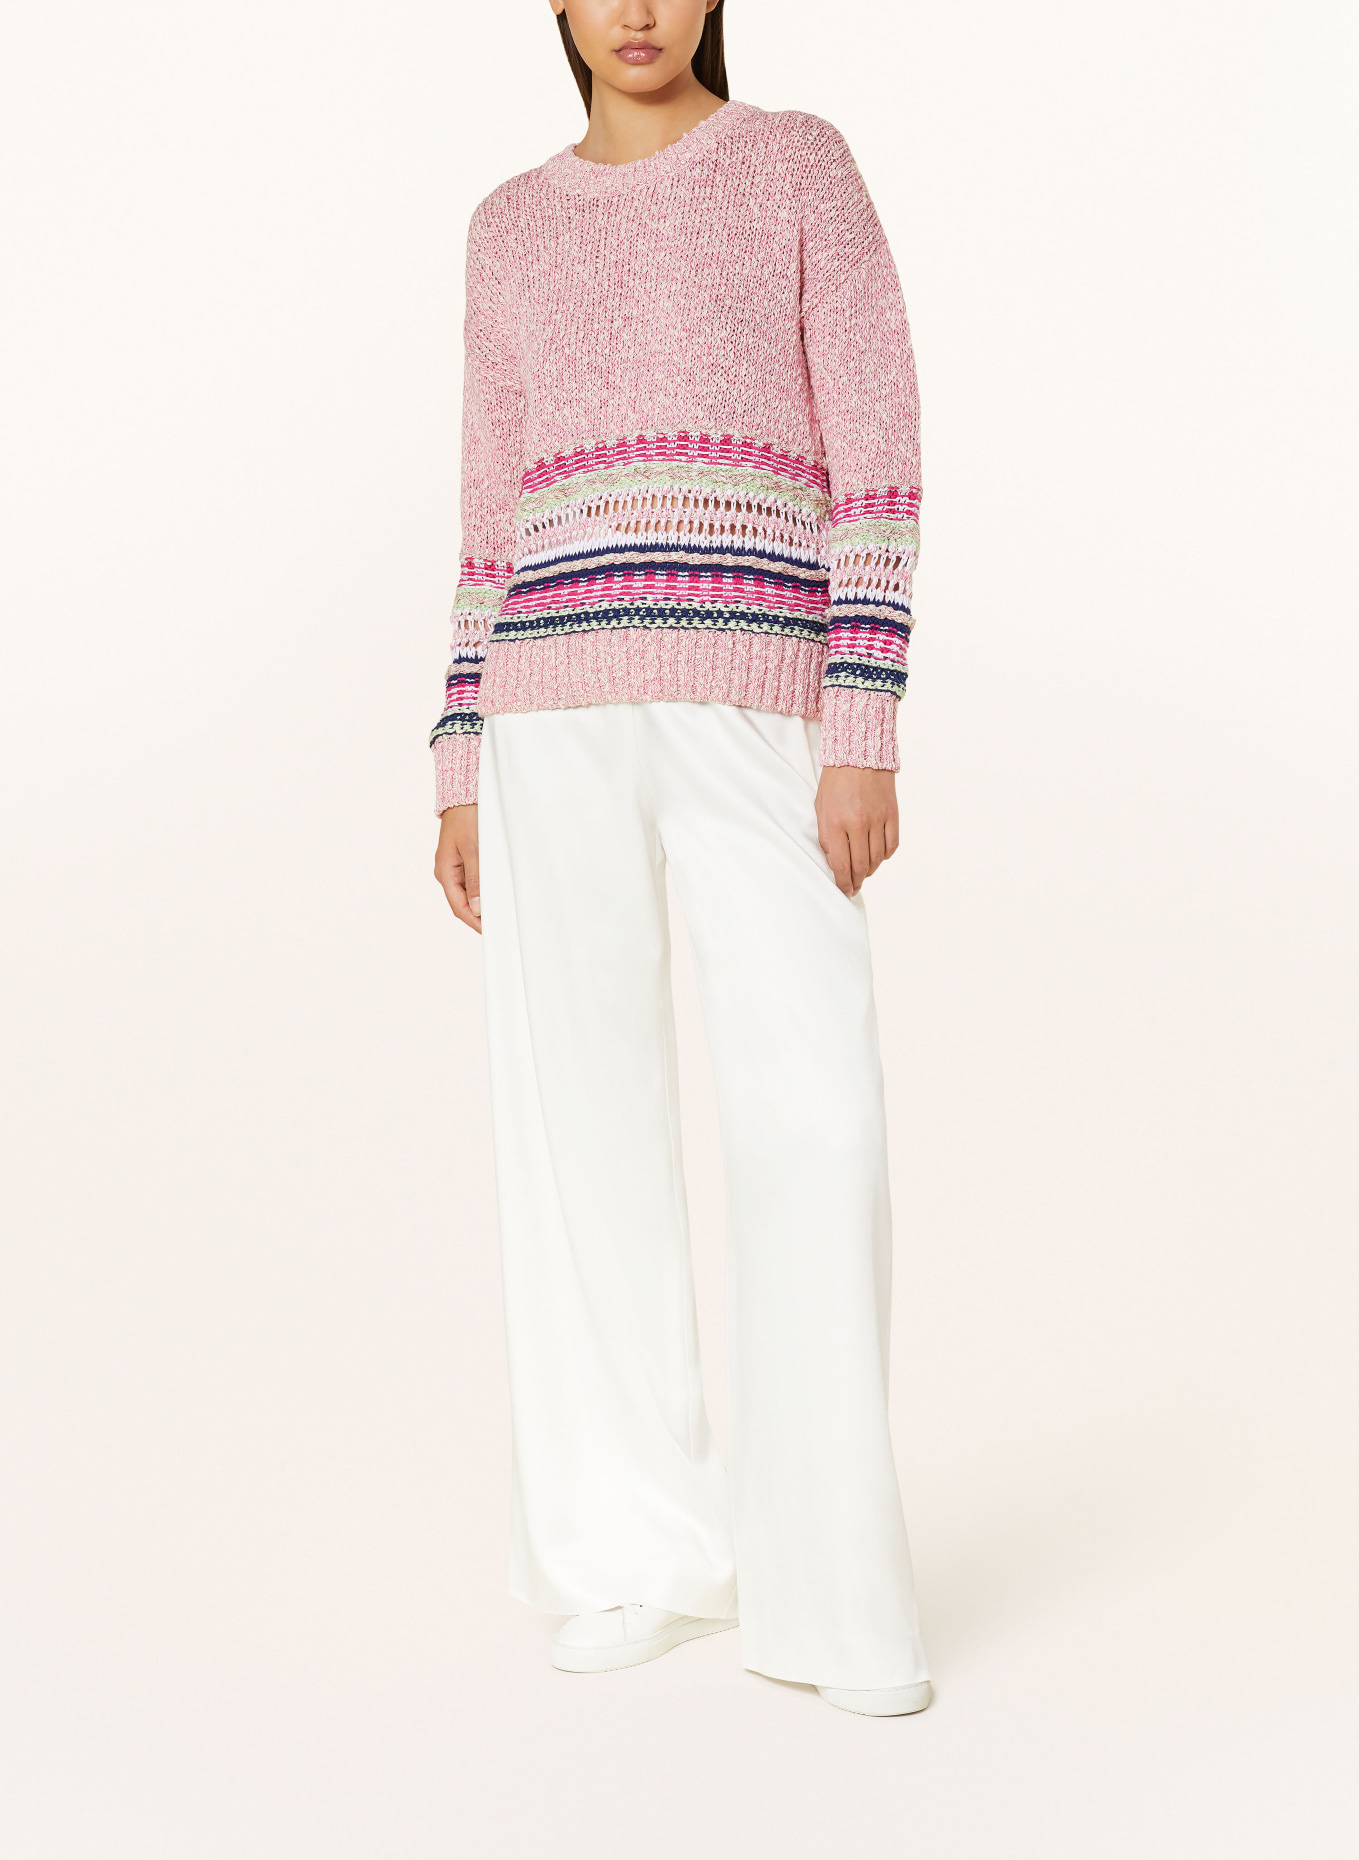 rich&royal Pullover, Farbe: CREME/ WEISS/ PINK (Bild 2)